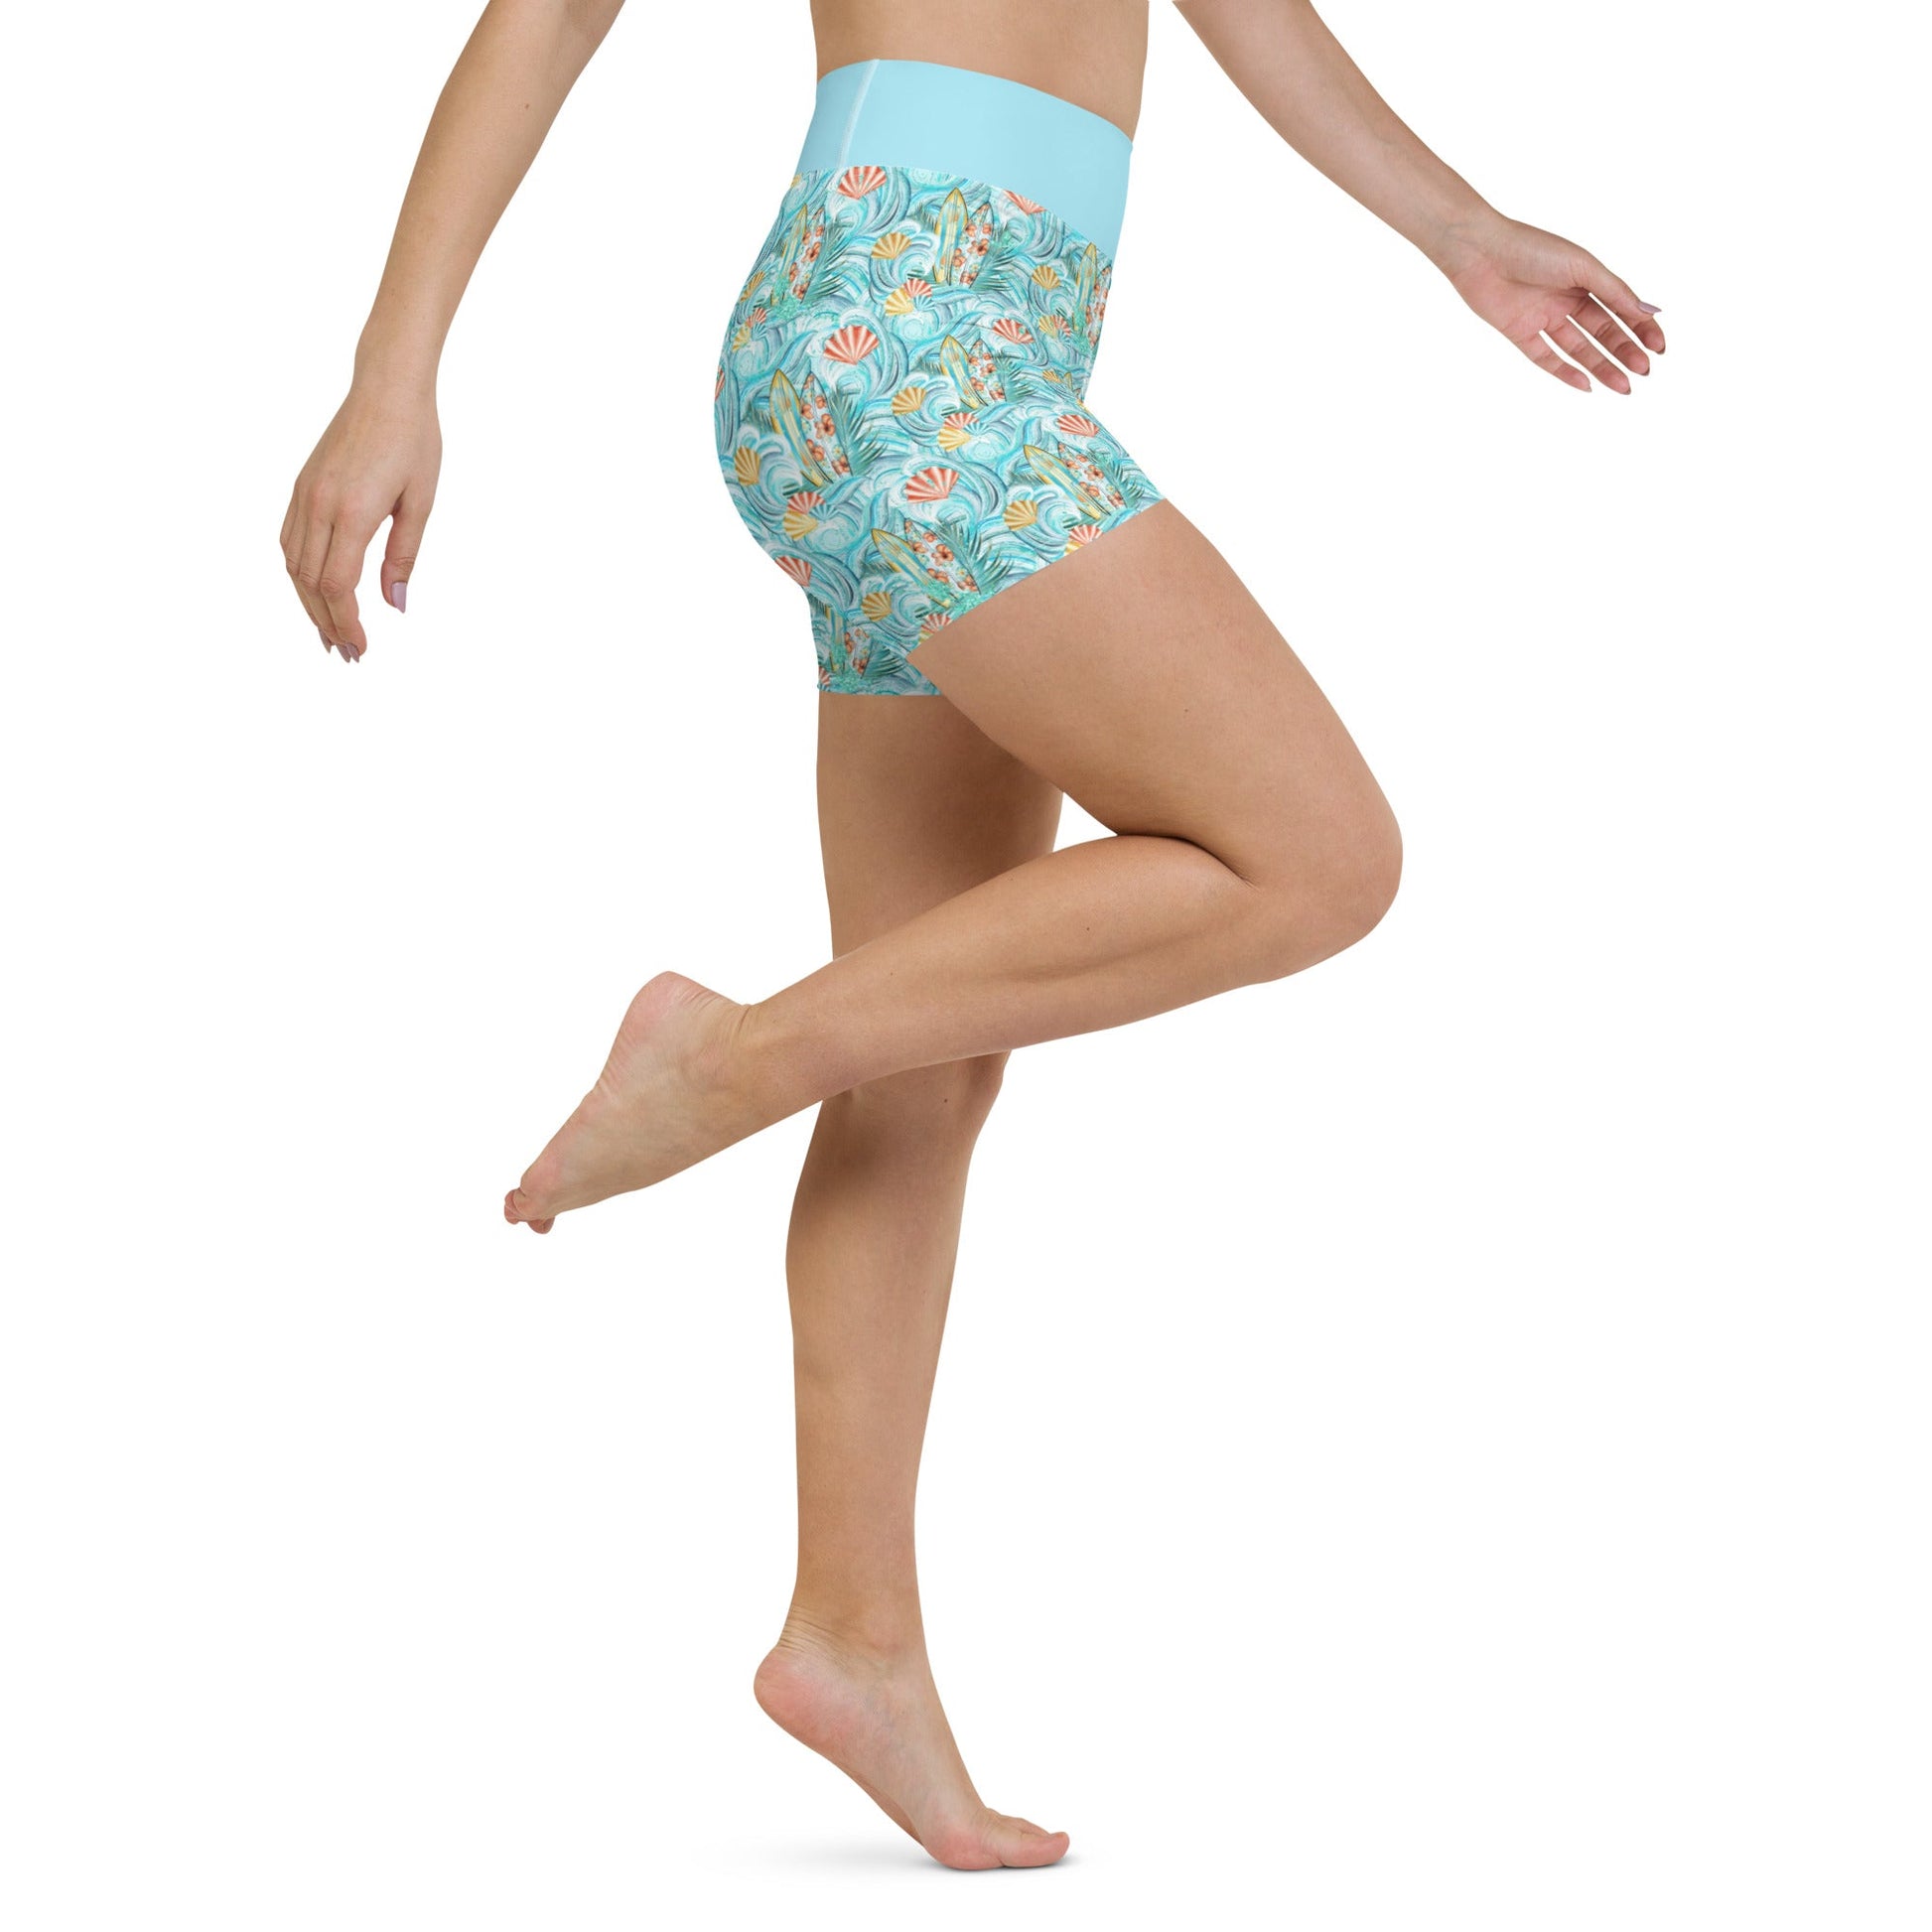 Be Extra! Summer Vibes Yoga Shorts - BeExtra! Apparel & More